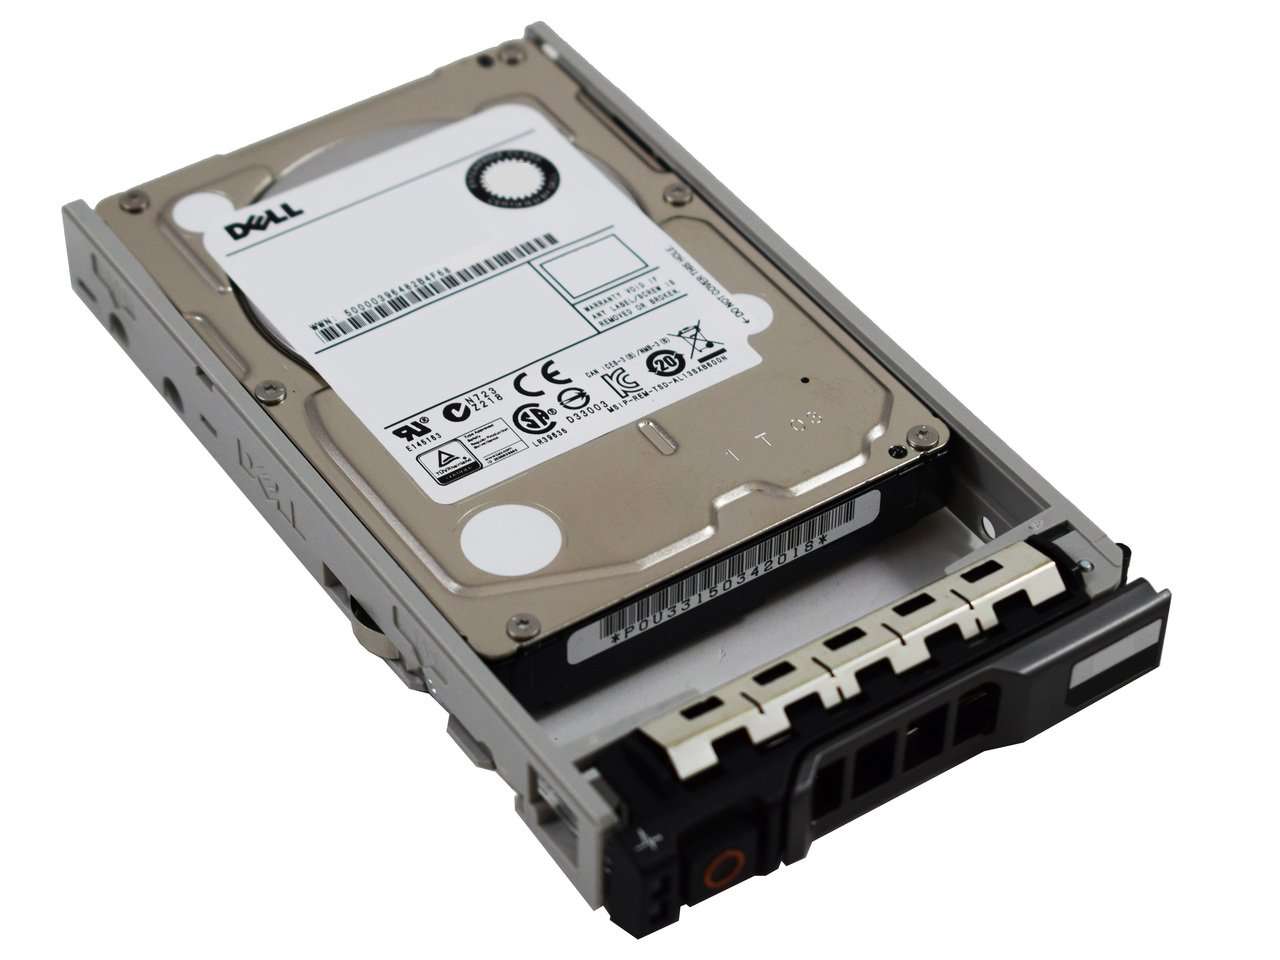 Dell G13 400-23546 600GB 10K RPM SAS 6Gb/s 512n 2.5" Manufacturer Recertified HDD